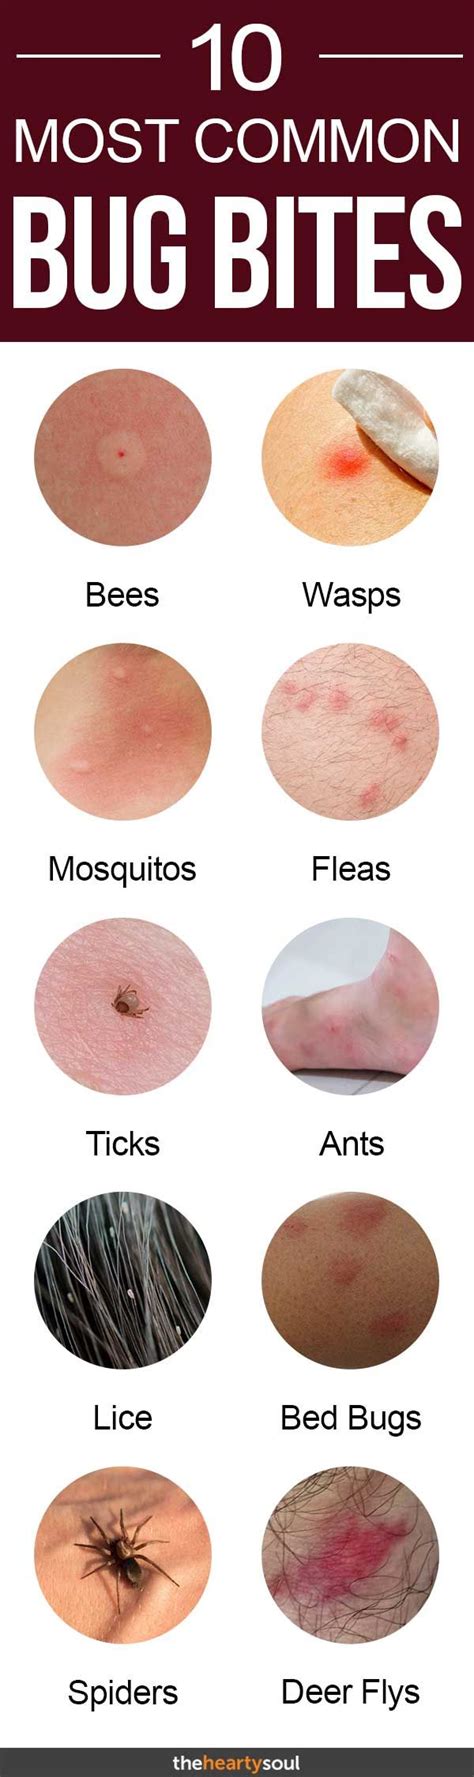 Identify The 10 Most Common Bug Bites In North America And How To Avoid